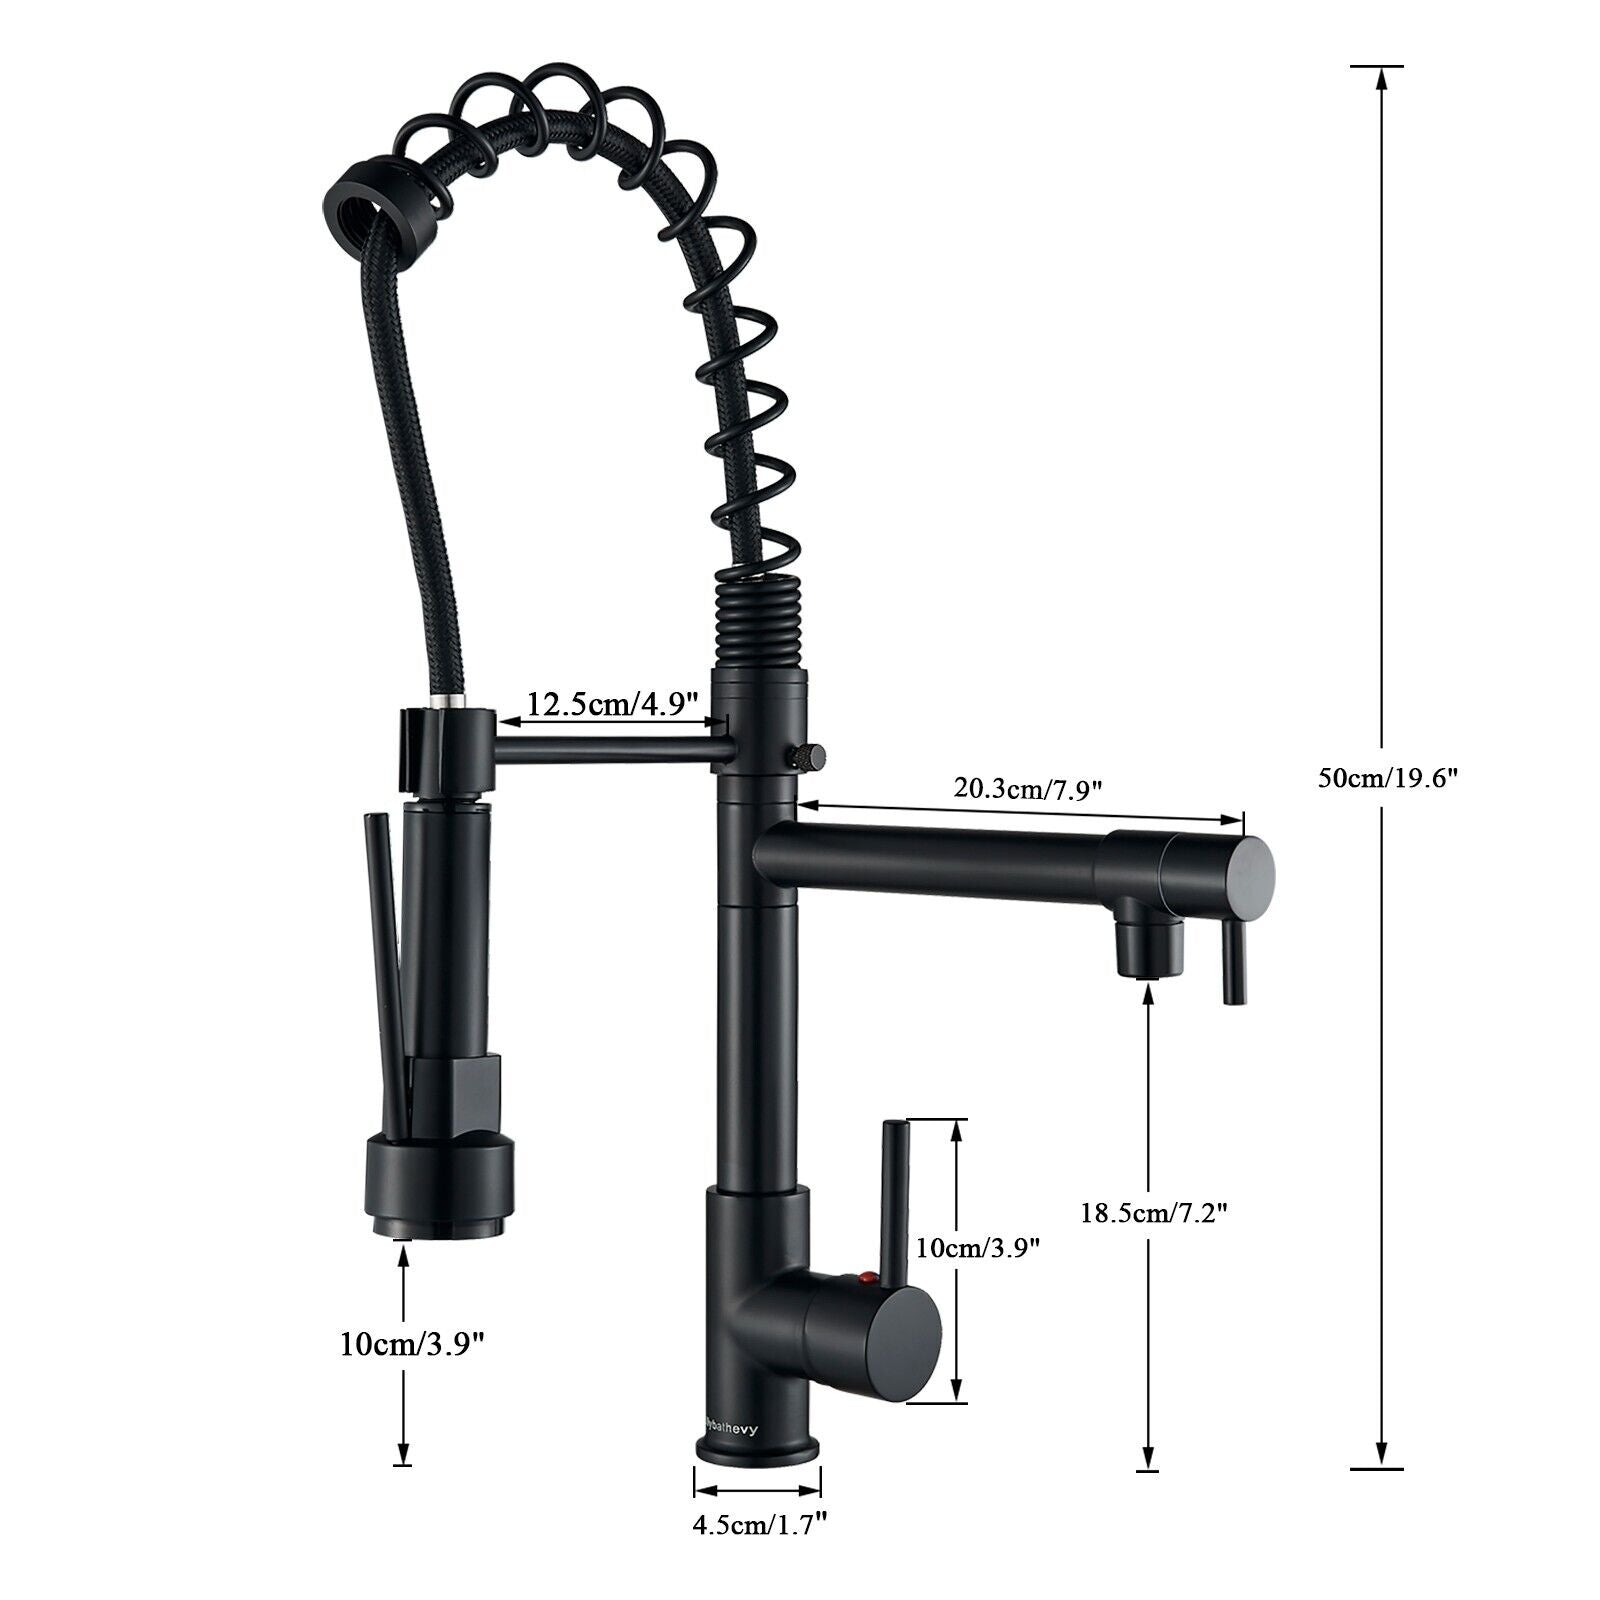 A stainless steel kitchen tap with a gooseneck spout and dual-handle operation for precise temperature control.